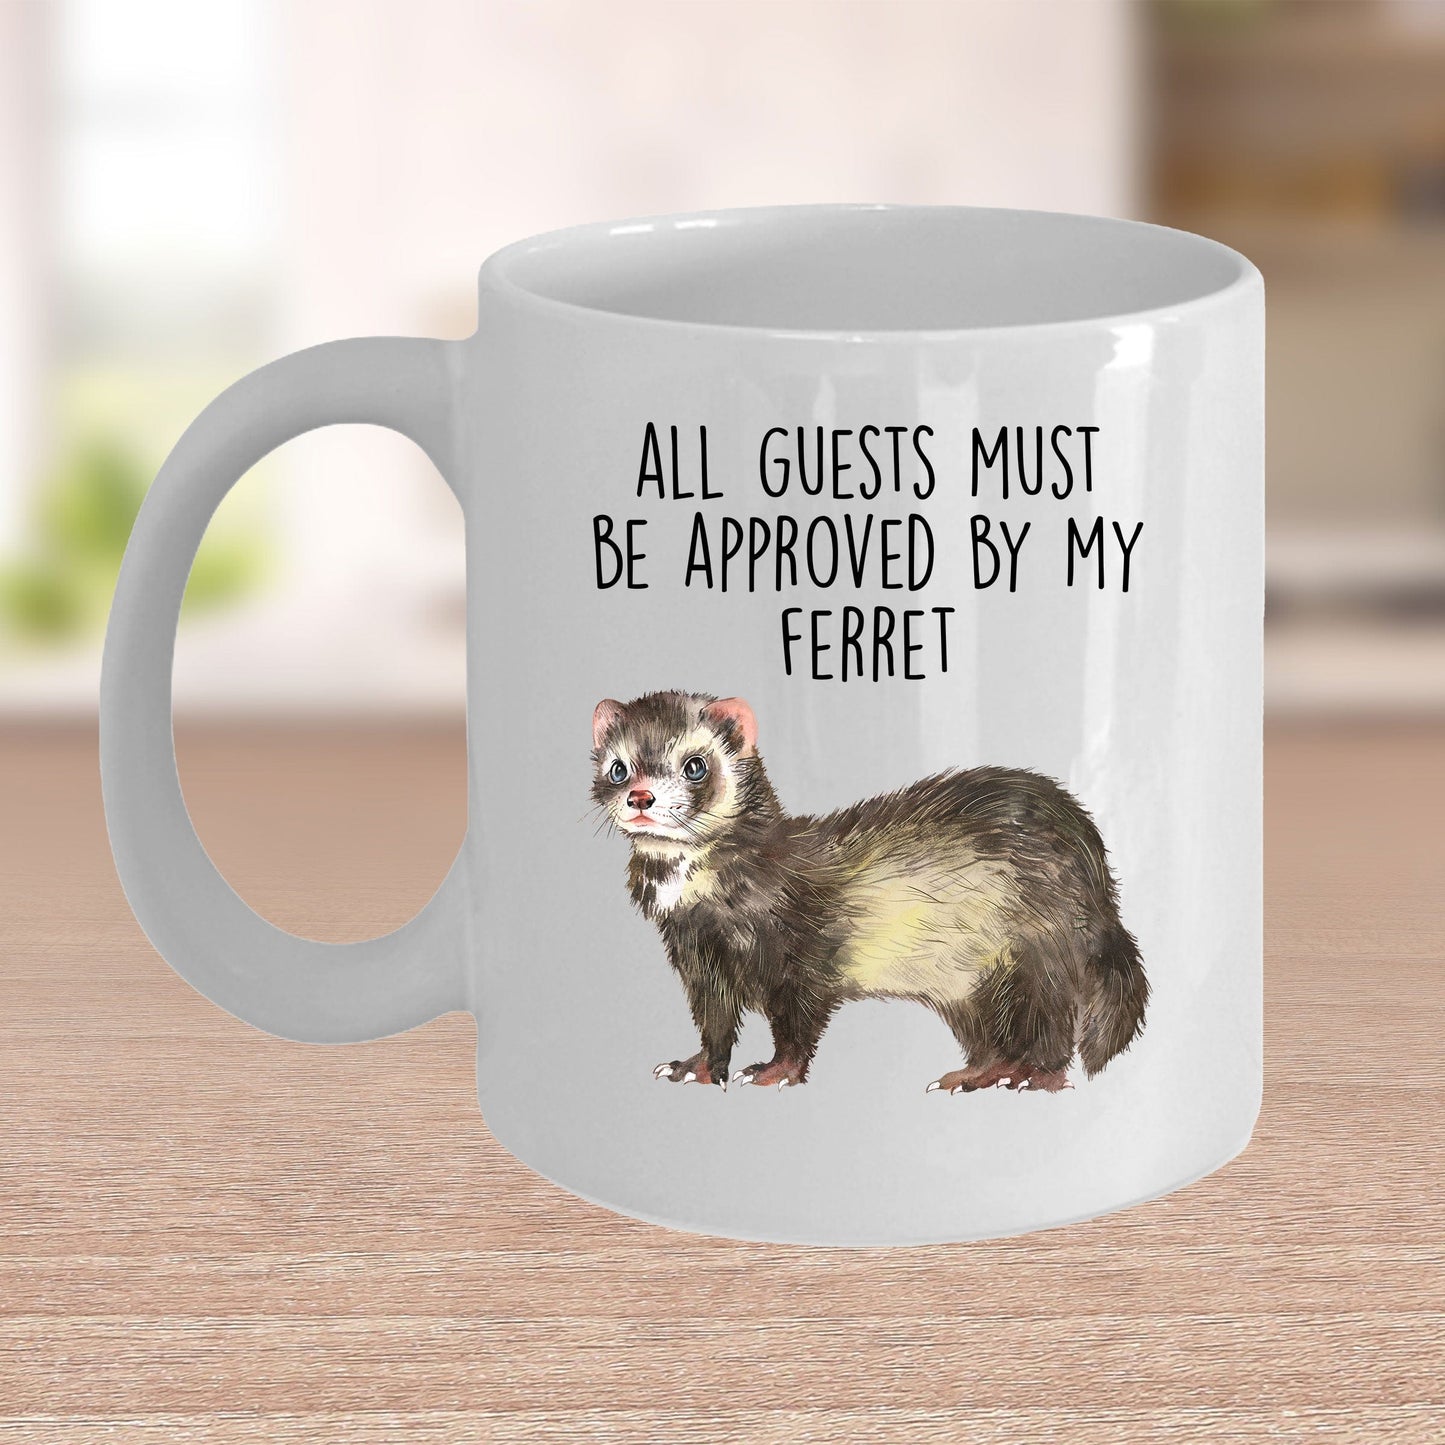 Funny Ferret Custom Ceramic Coffee Mug - All Guests Must Be approved By My Ferret